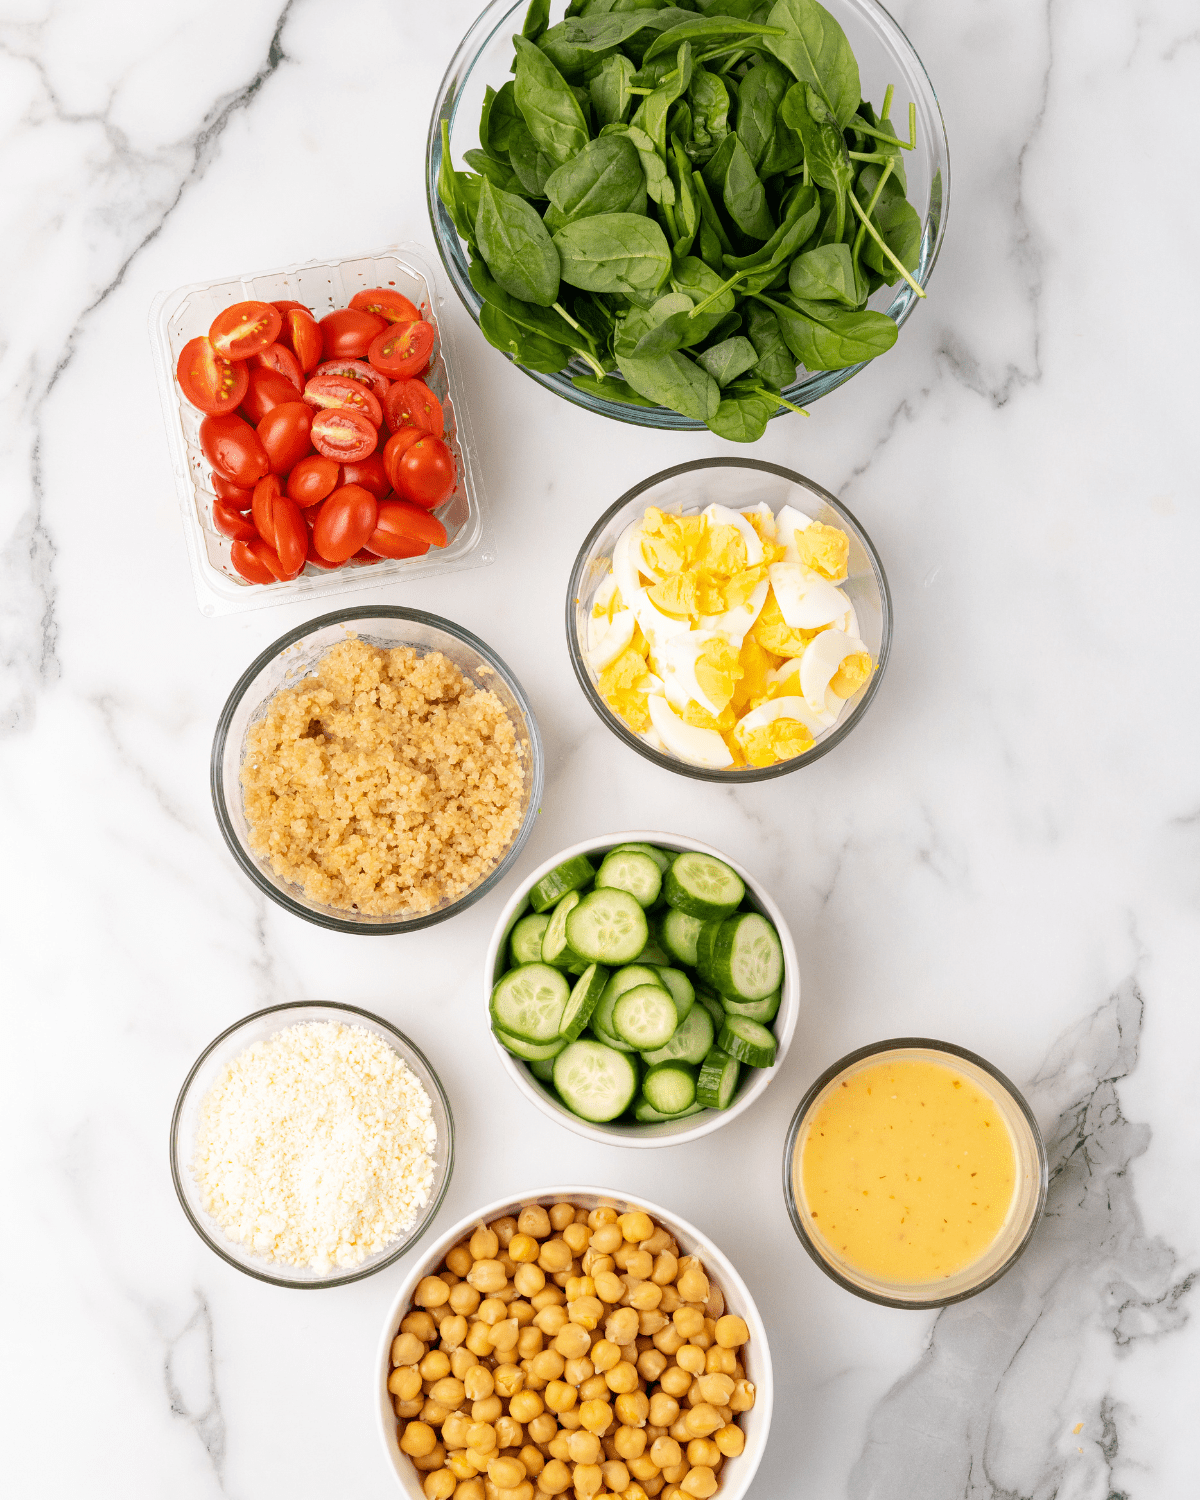 ingredients to make a protein salad in a jar,